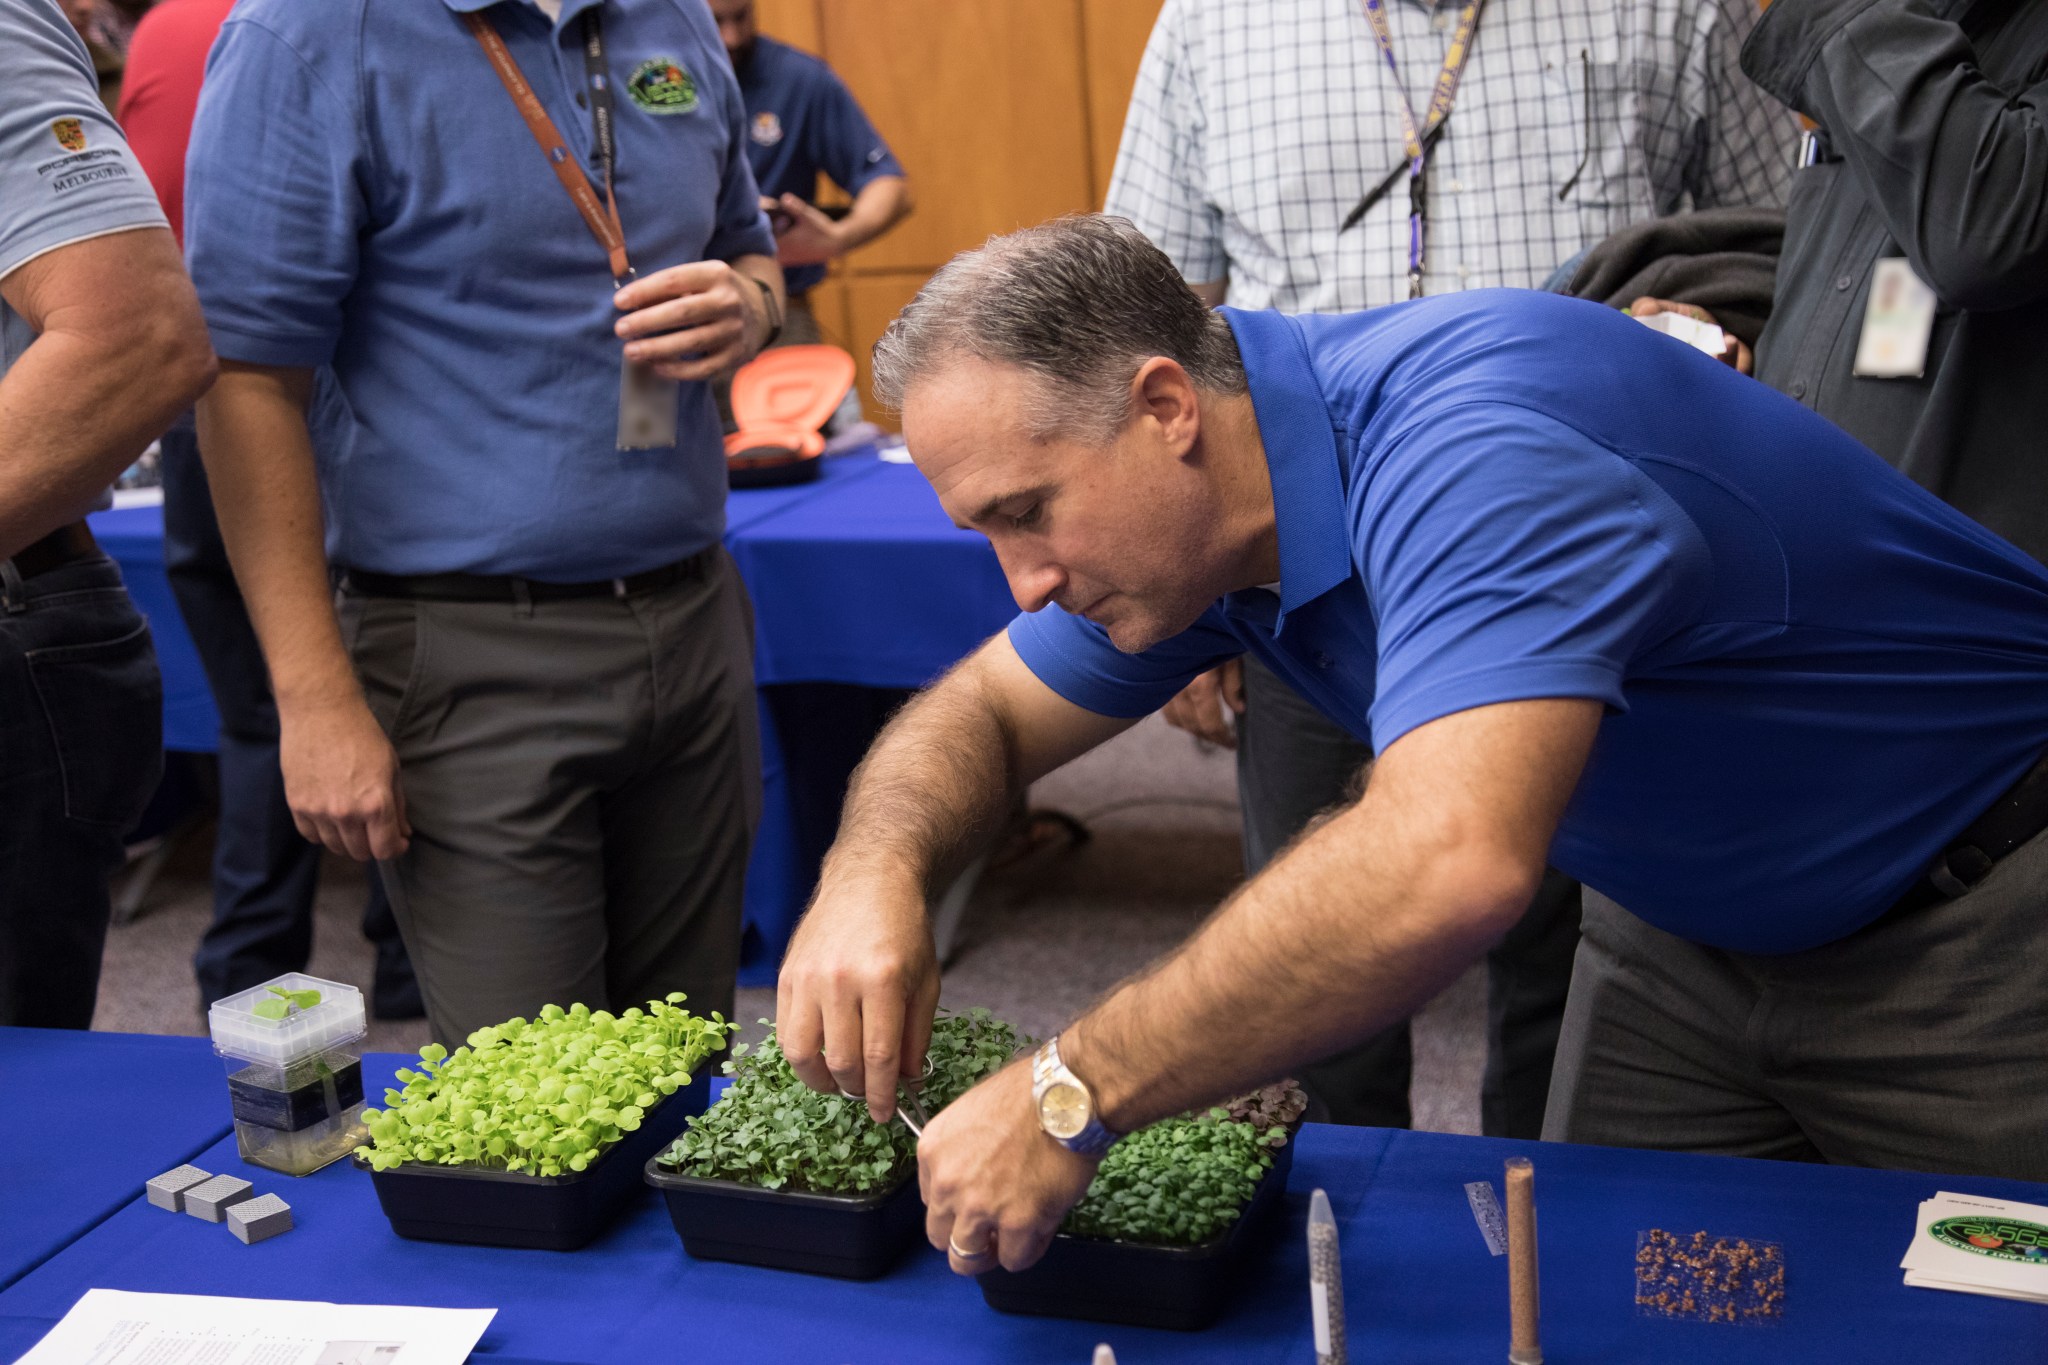 Microgreens on display during the Innovation Expo at NASA's Kennedy Space Center in Florida.